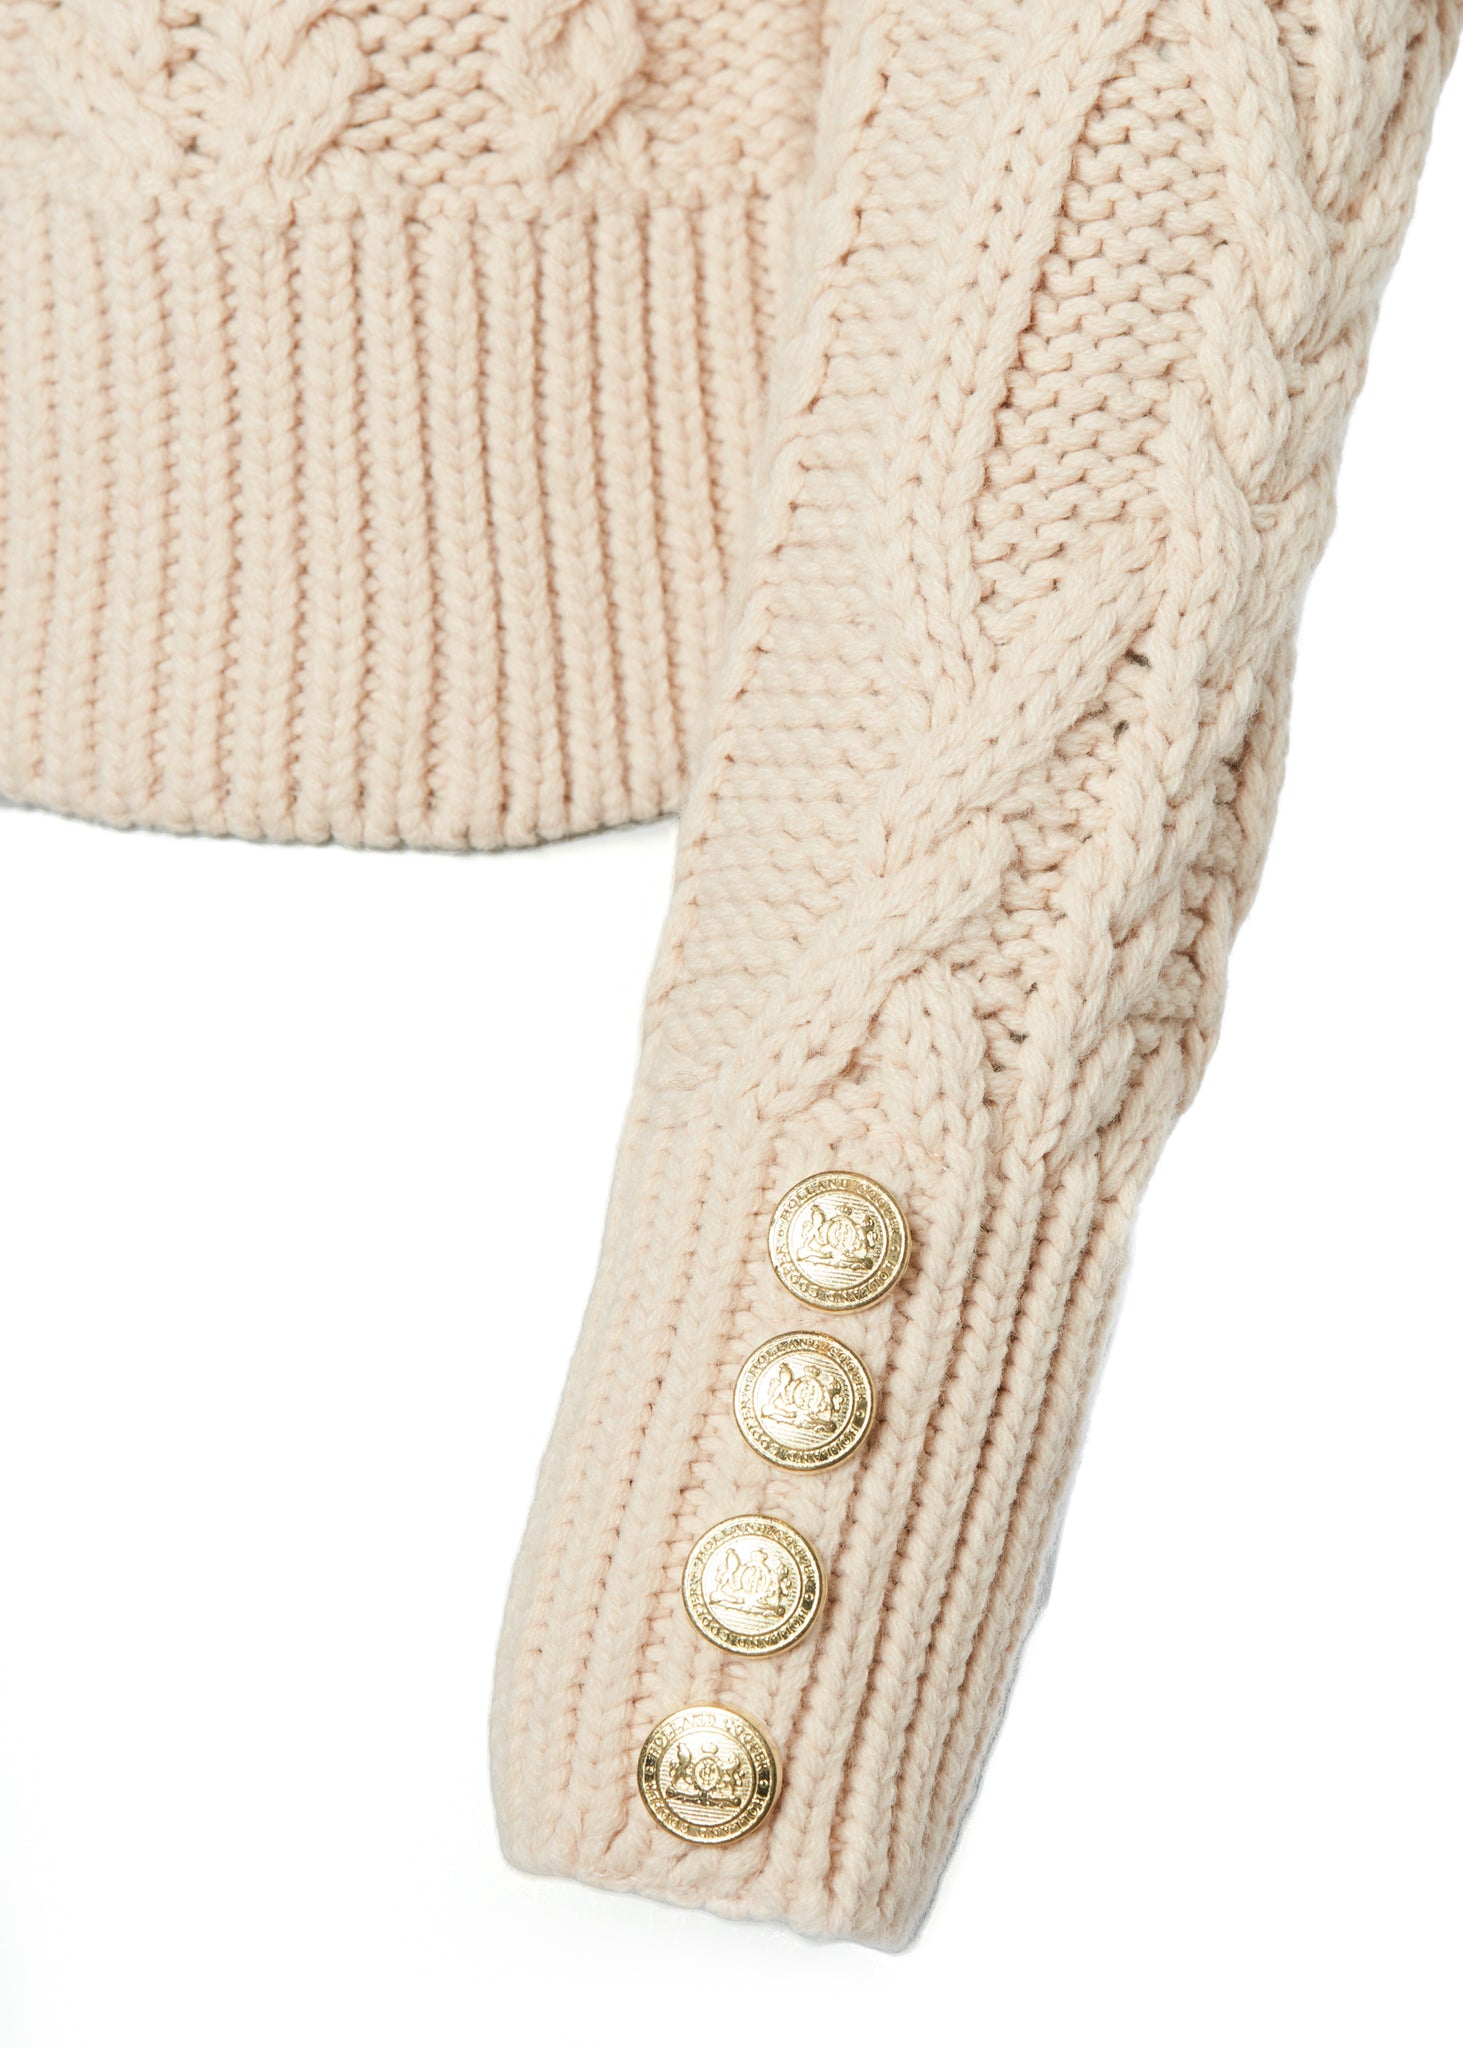 gold button detail on the cuffs of a chunky cable knit roll neck jumper in oatmeal with dropped shoulders and thick ribbed cable trims and gold buttons on cuffs and collar